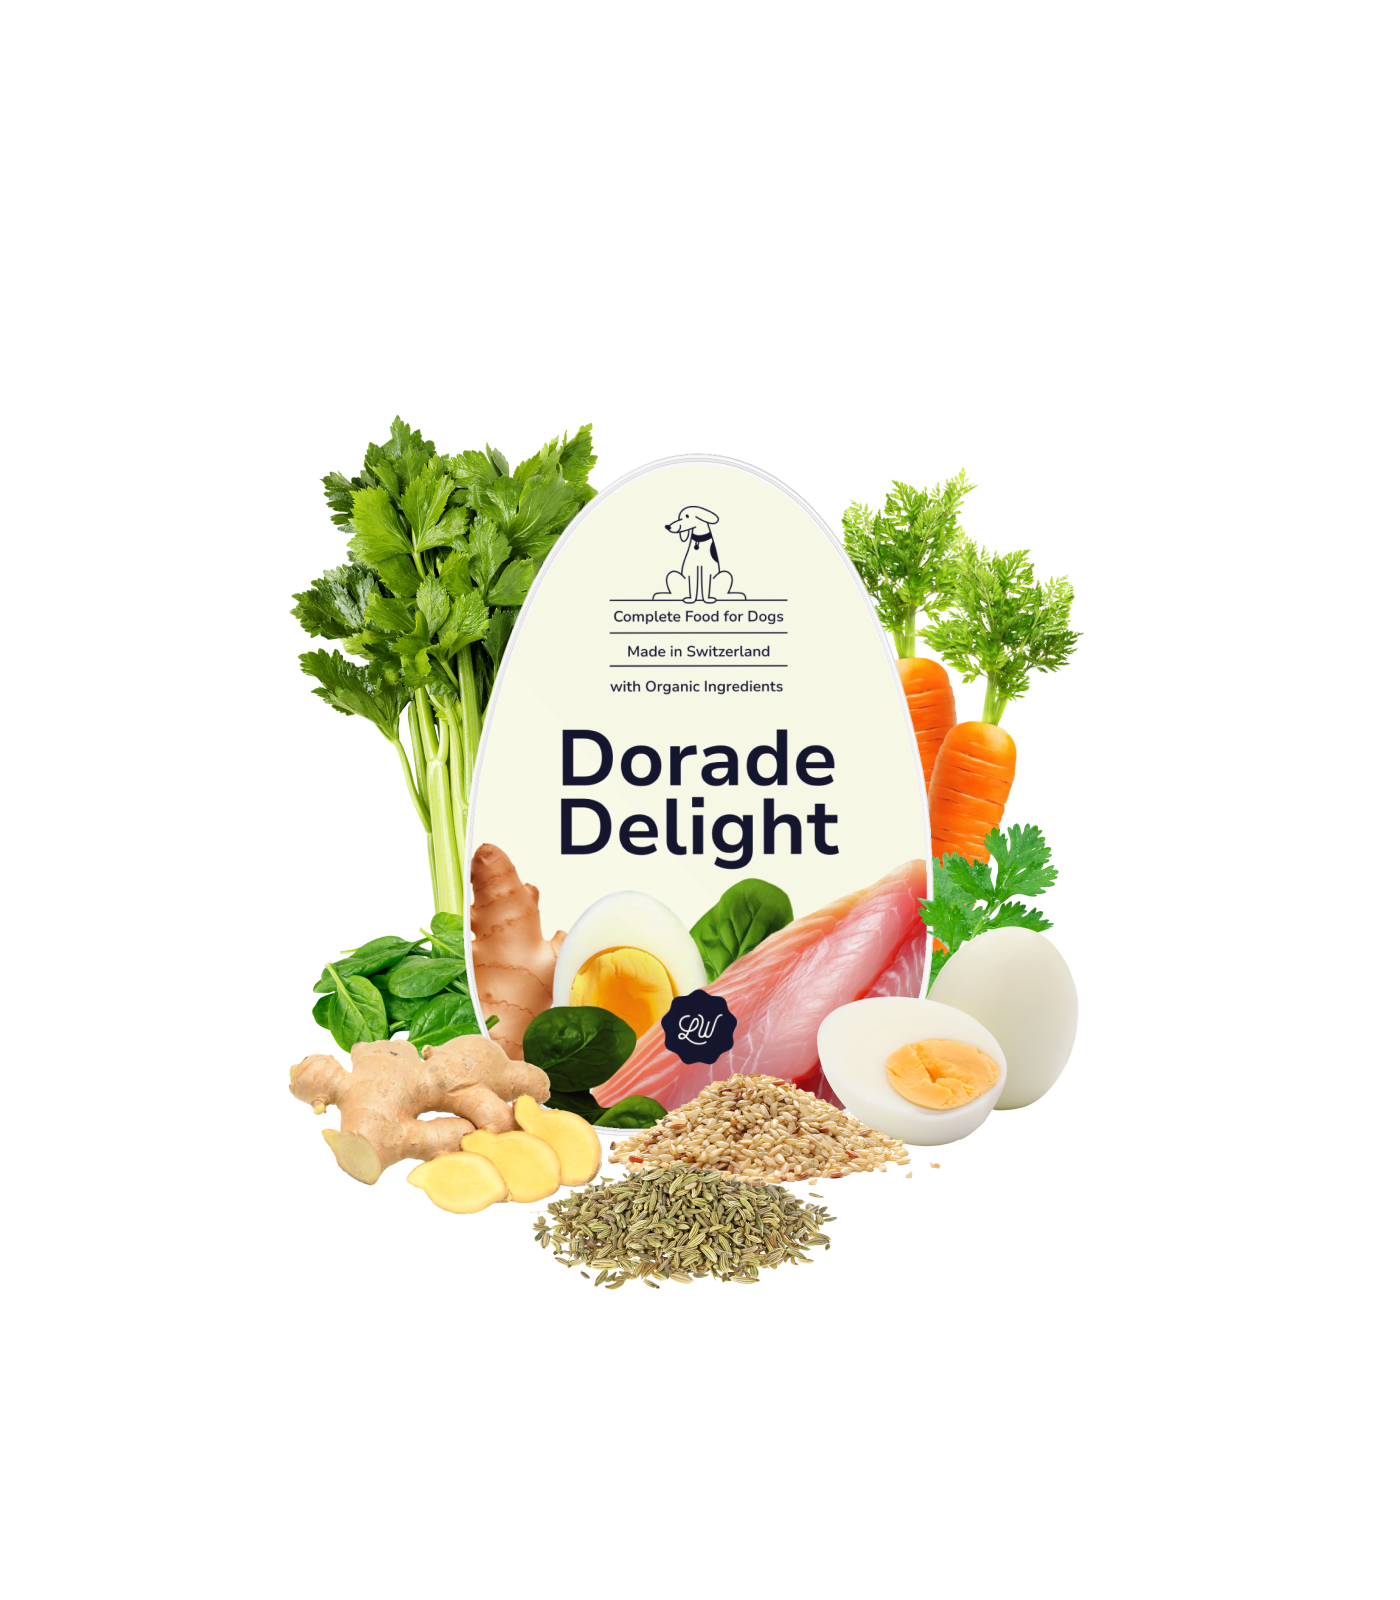 LOONAWELL's Complete Food for Dogs, Dorade Delight, to go above and beyond your dog's dietary needs. Organic and human grade. Made in Switzerland.